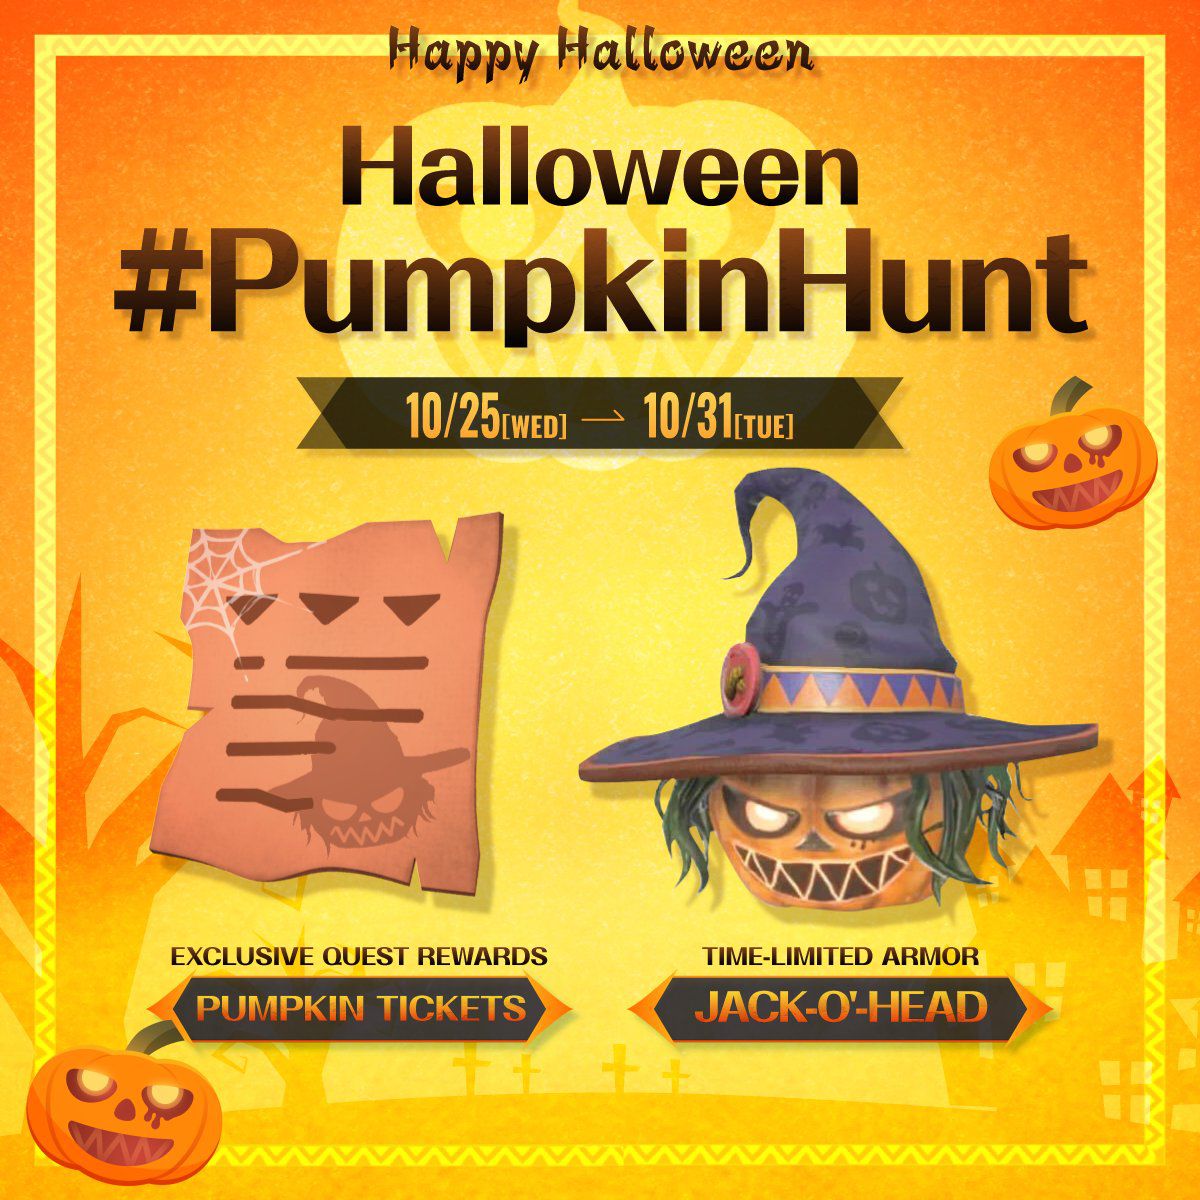 A poster highlighting Pumpkin Tickets and the Jack-o’-Head armor in Monster Hunter Now